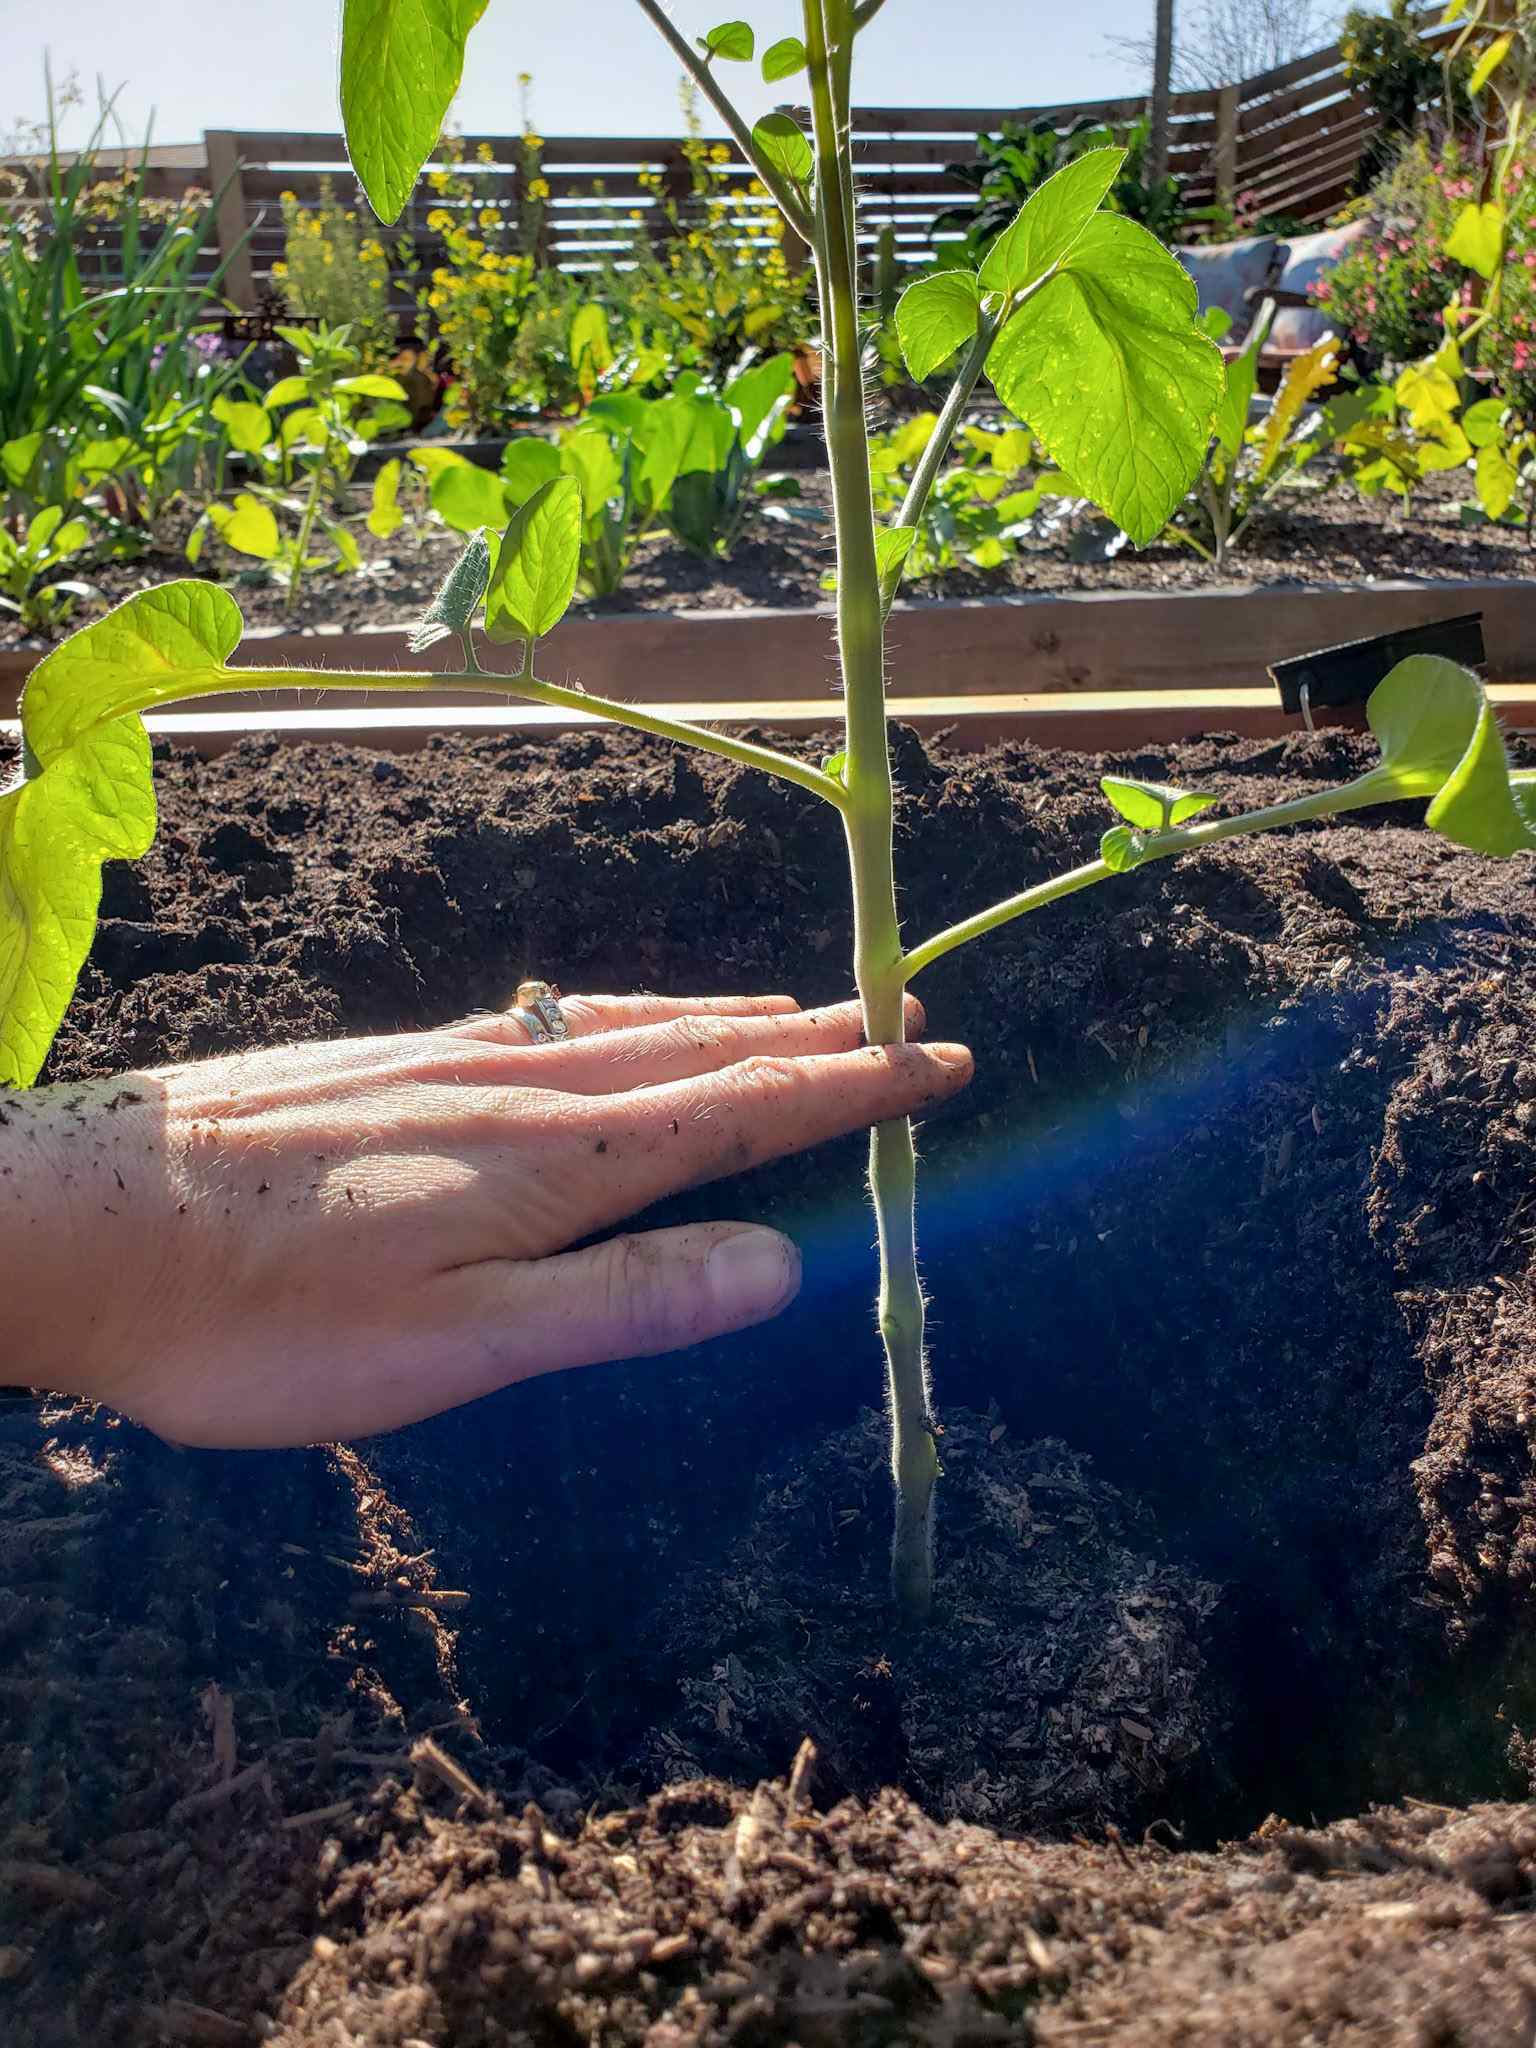 A close up image of a tomato seedling sitting inside a deep hole made in a raised garden bed, the plant will be planted deep inside the bed, burying at least five inches of the plants stem. New roots will grow off of the tomato stem in time. A hand is positioned at the soil line, holding the spot on the tomato stem that will be buried up to. In the background, there is another raised garden bed that contains many varieties of beans and flowers. 